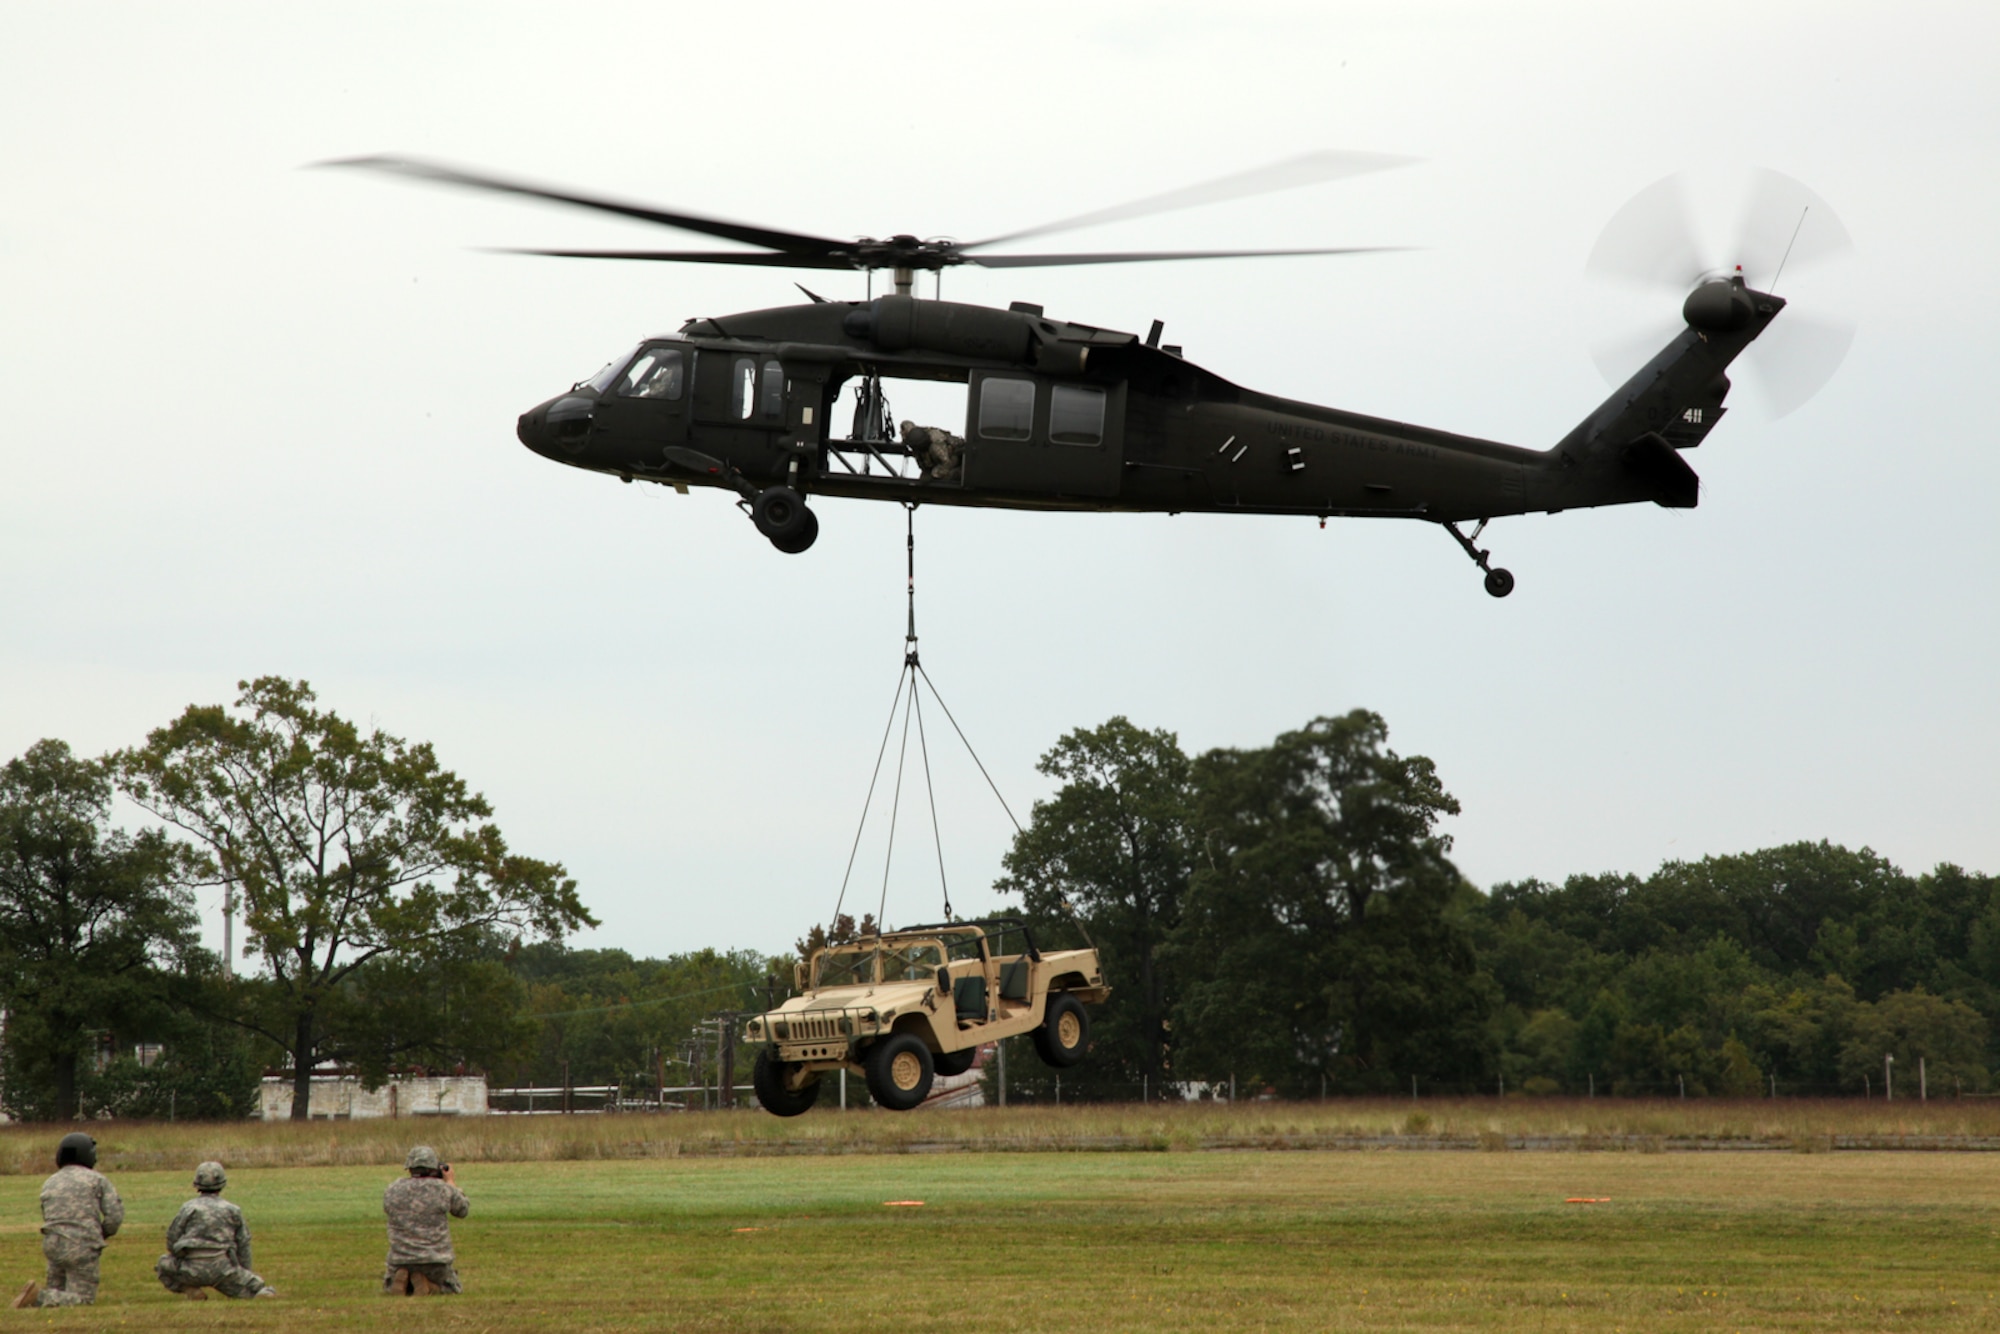 A UH-60 Black Hawk helicopter aircrew from C Company, 2-224 Aviation Battalion, sling loads a HMMWV above Weide Army Heliport as part of a joint air assault training exercise with the 175th Wing and the 55th Signal Company (Combat Camera) at Aberdeen Proving Ground, Md., on Sept. 29, 2010.  The Maryland National Guard conducted tactical passenger loading and external aerial delivery in preparation for overseas contingency operations and domestic response activities. Photo by U.S. Army Private First Class Alicia Brand, 55th Signal Company (Combat
Camera)

